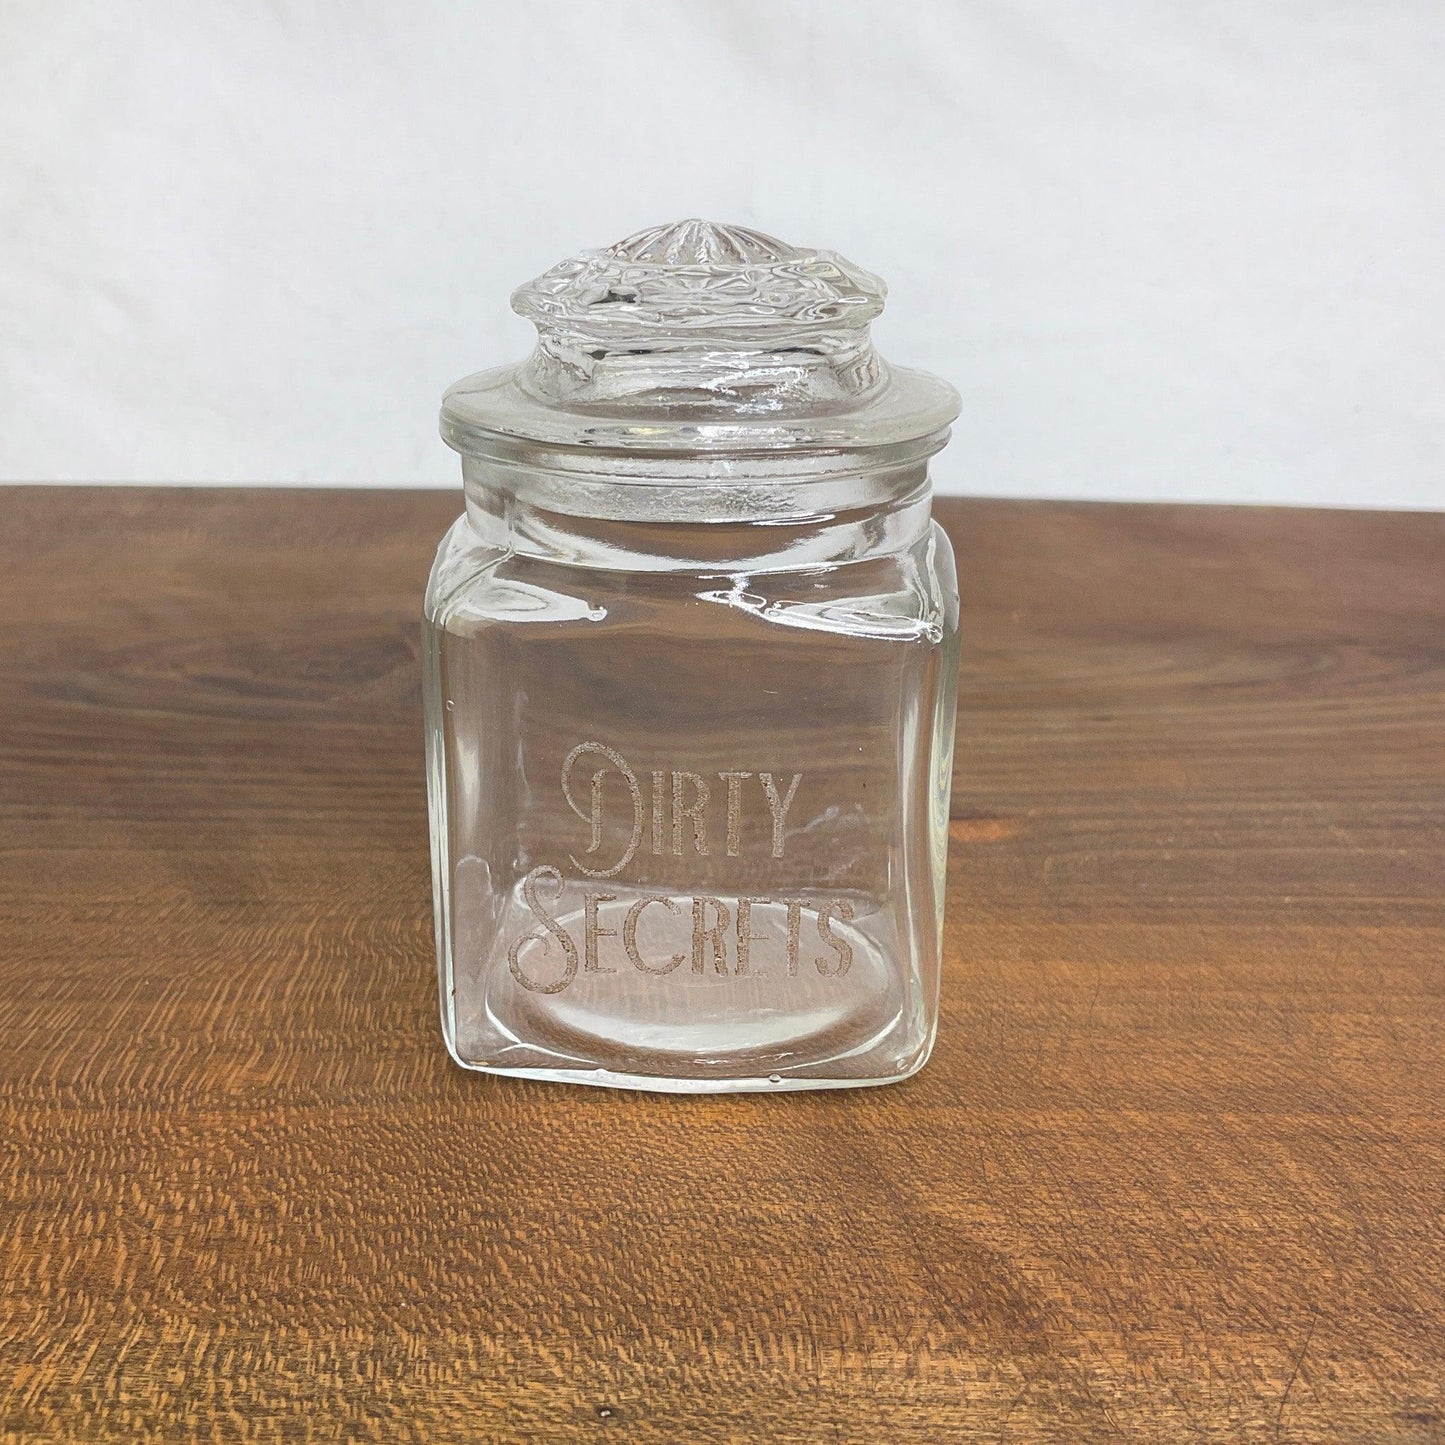 Dirty Secrets Apothecary Jar - Offensively Domestic